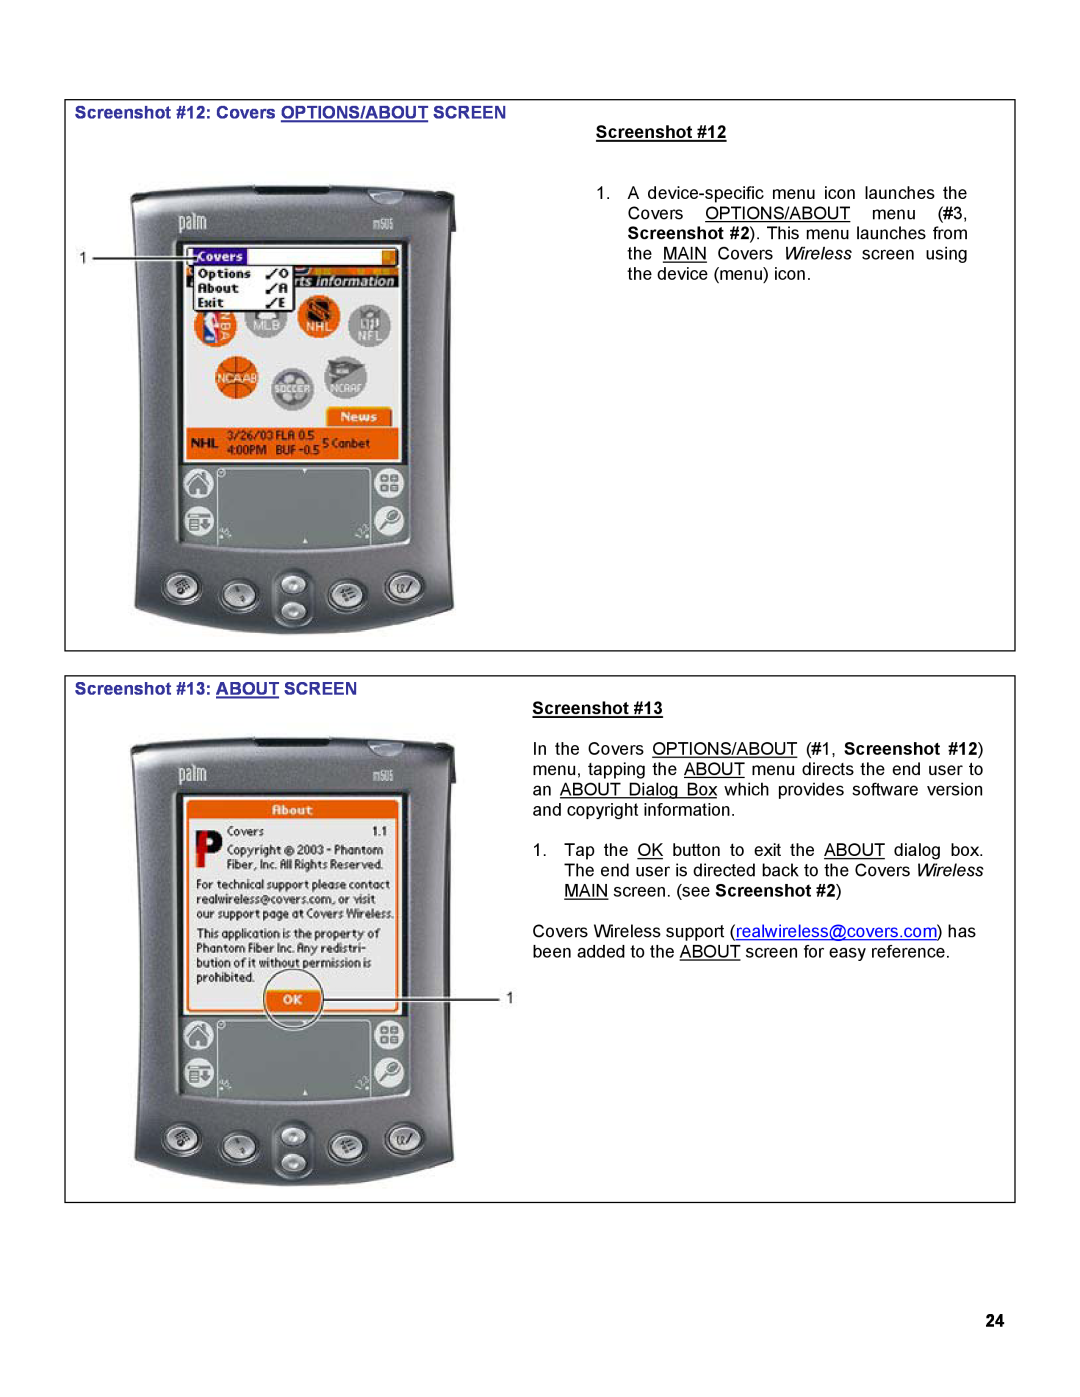 Palm OS Devices manual Screenshot #12 Covers OPTIONS/ABOUT SCREEN, Screenshot #13 ABOUT SCREEN 